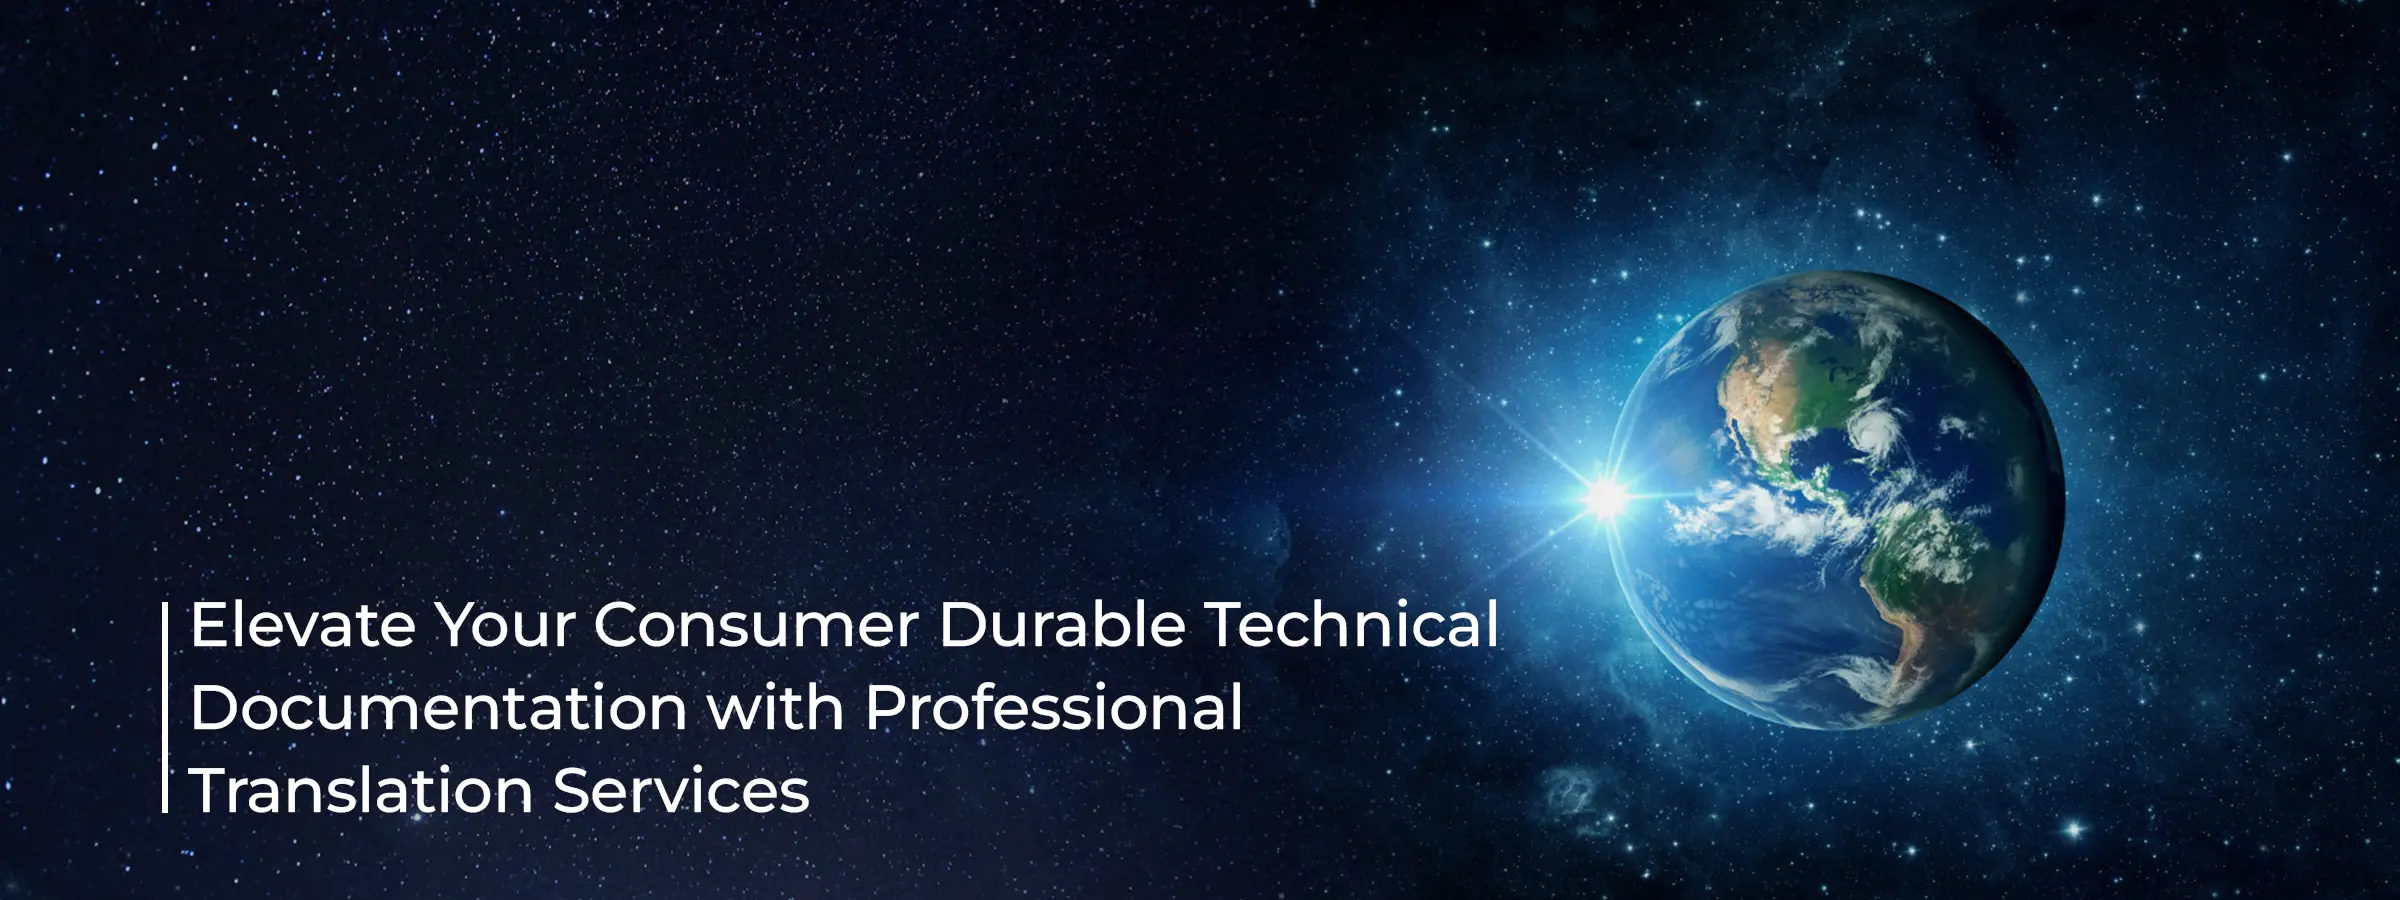 elevate-your-consumer-durable-technical-documentation-with-professional-translation-services